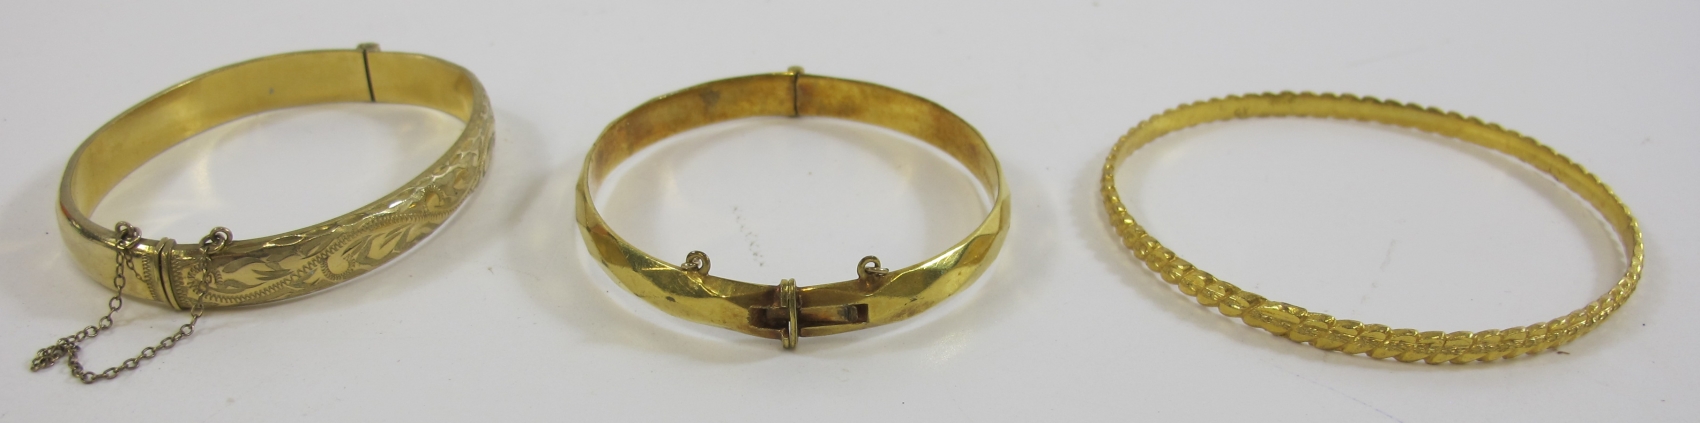 This is a Timed Online Auction on Bidspotter.co.uk, Click here to bid. 3 x Yellow metal bangles (est - Image 2 of 2